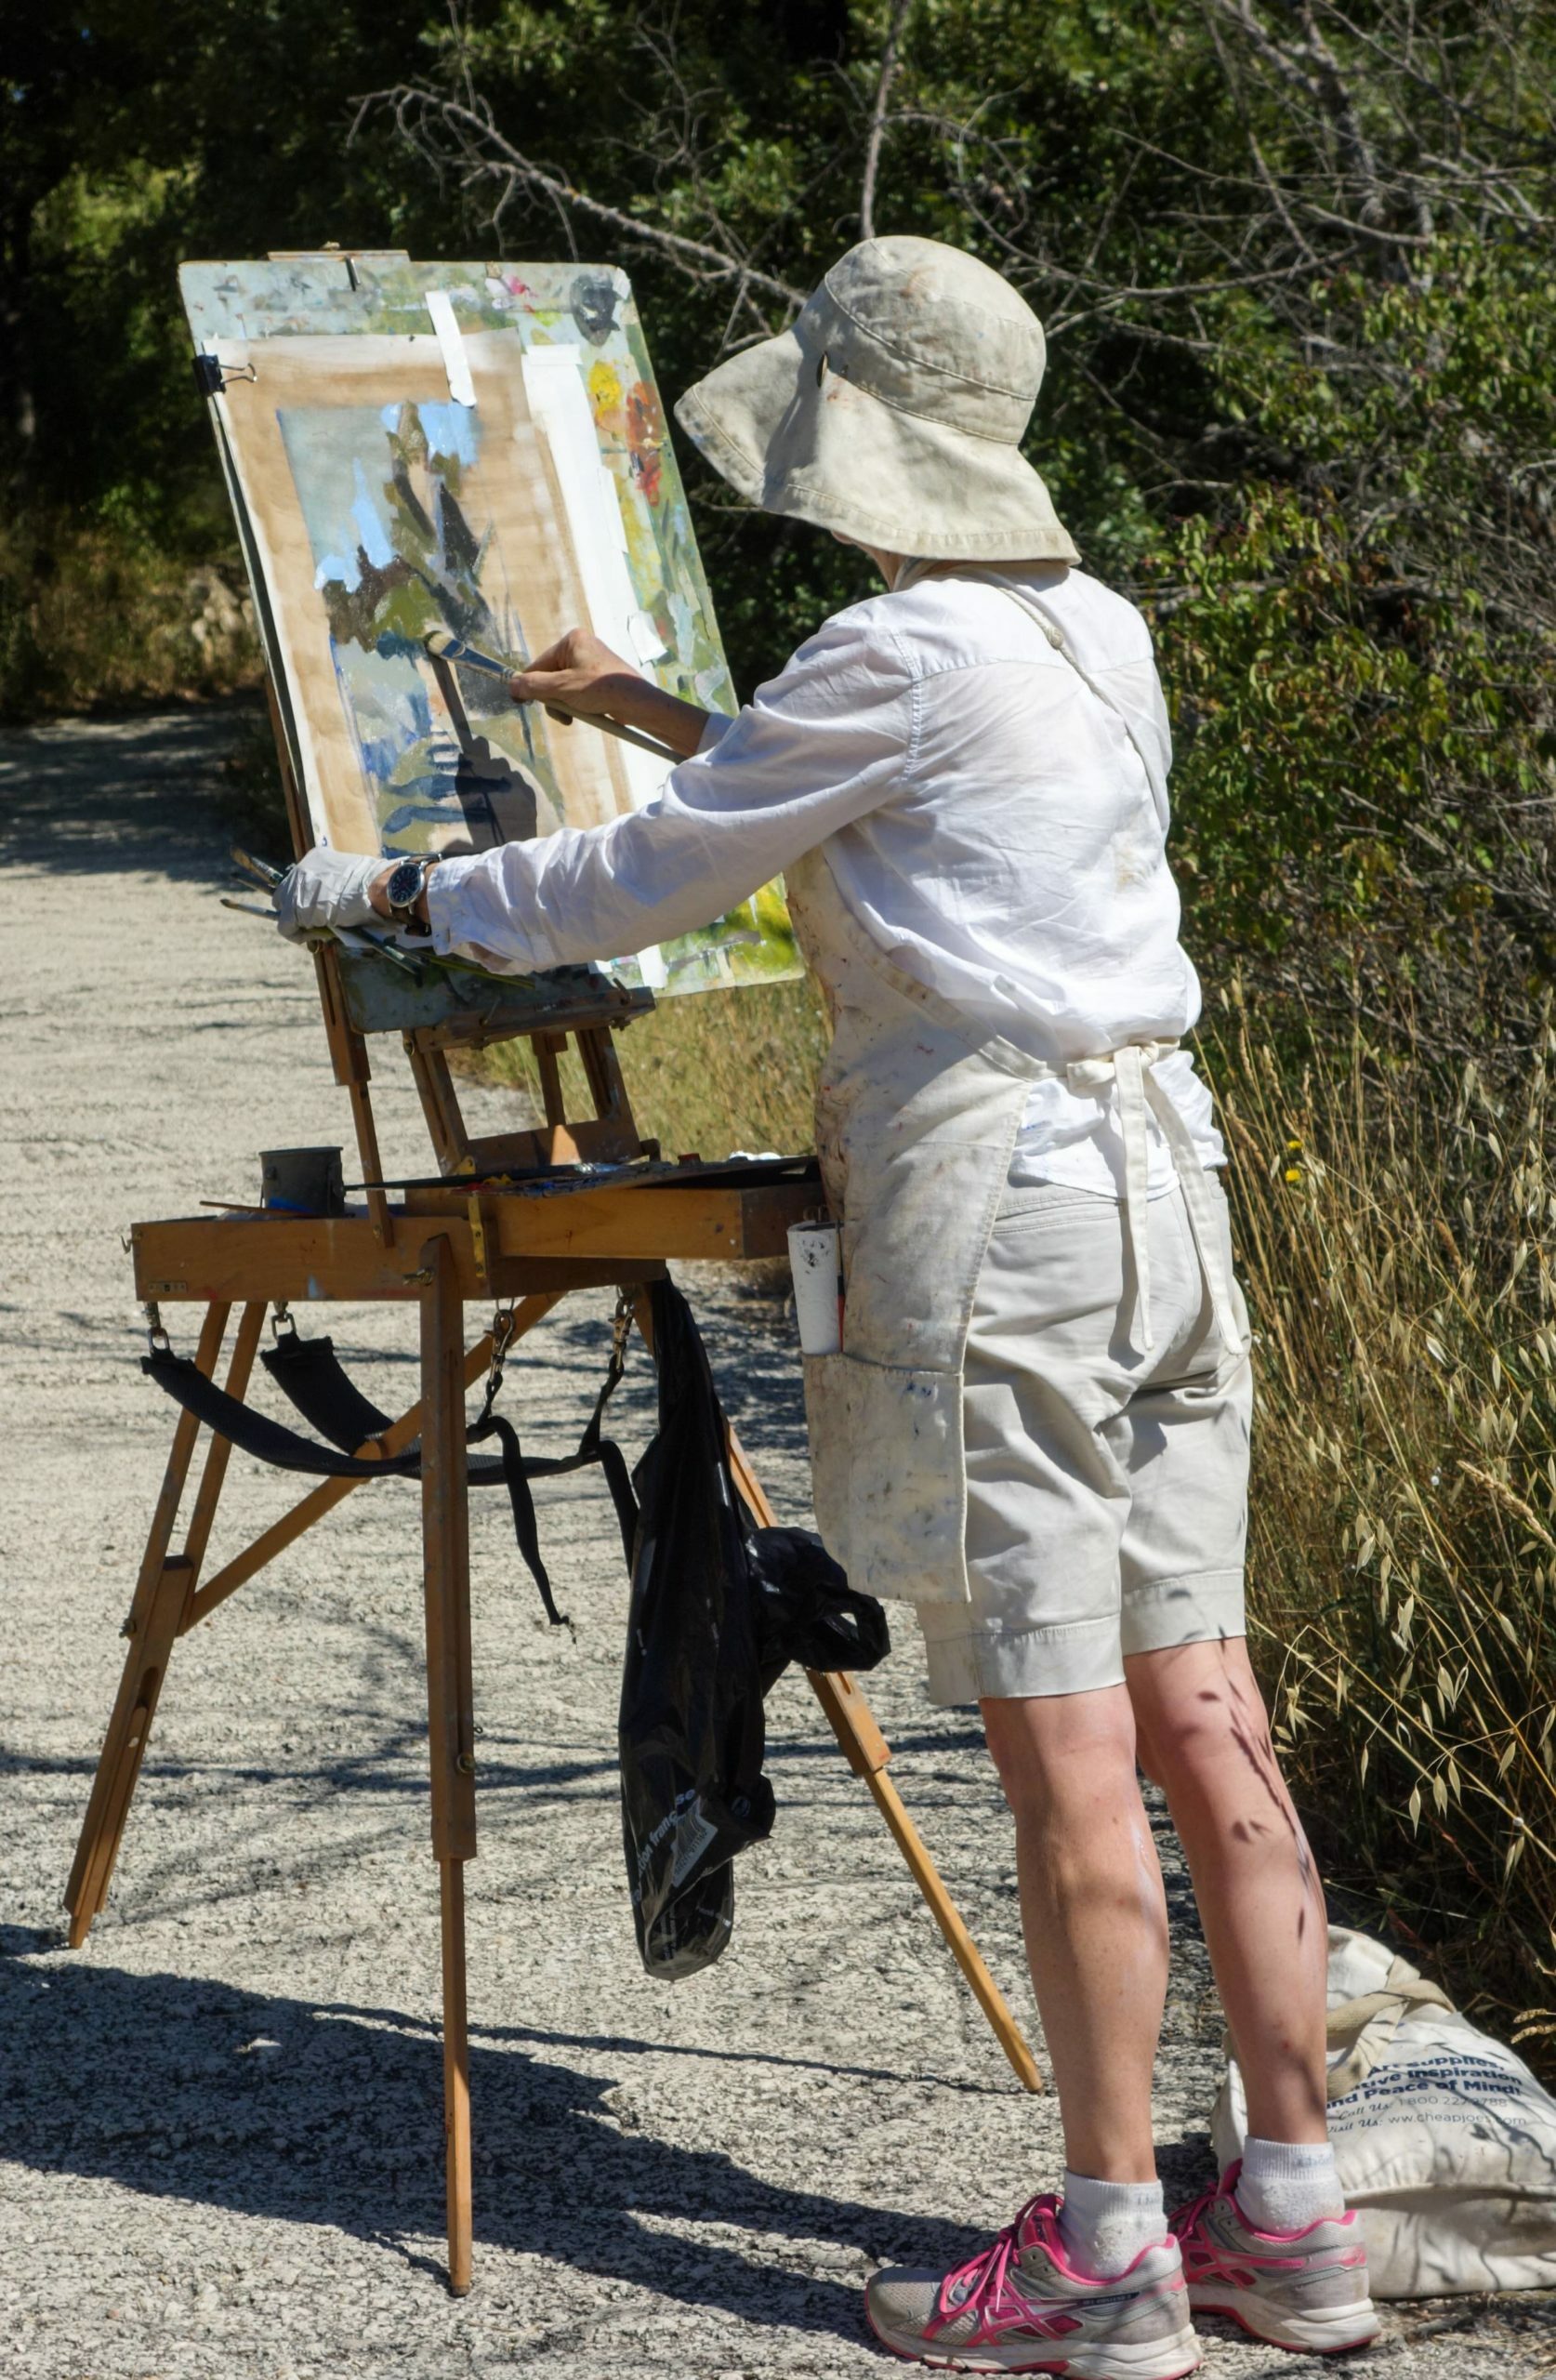 Are You Ready to Become a Professional Artist? - The Working Artist